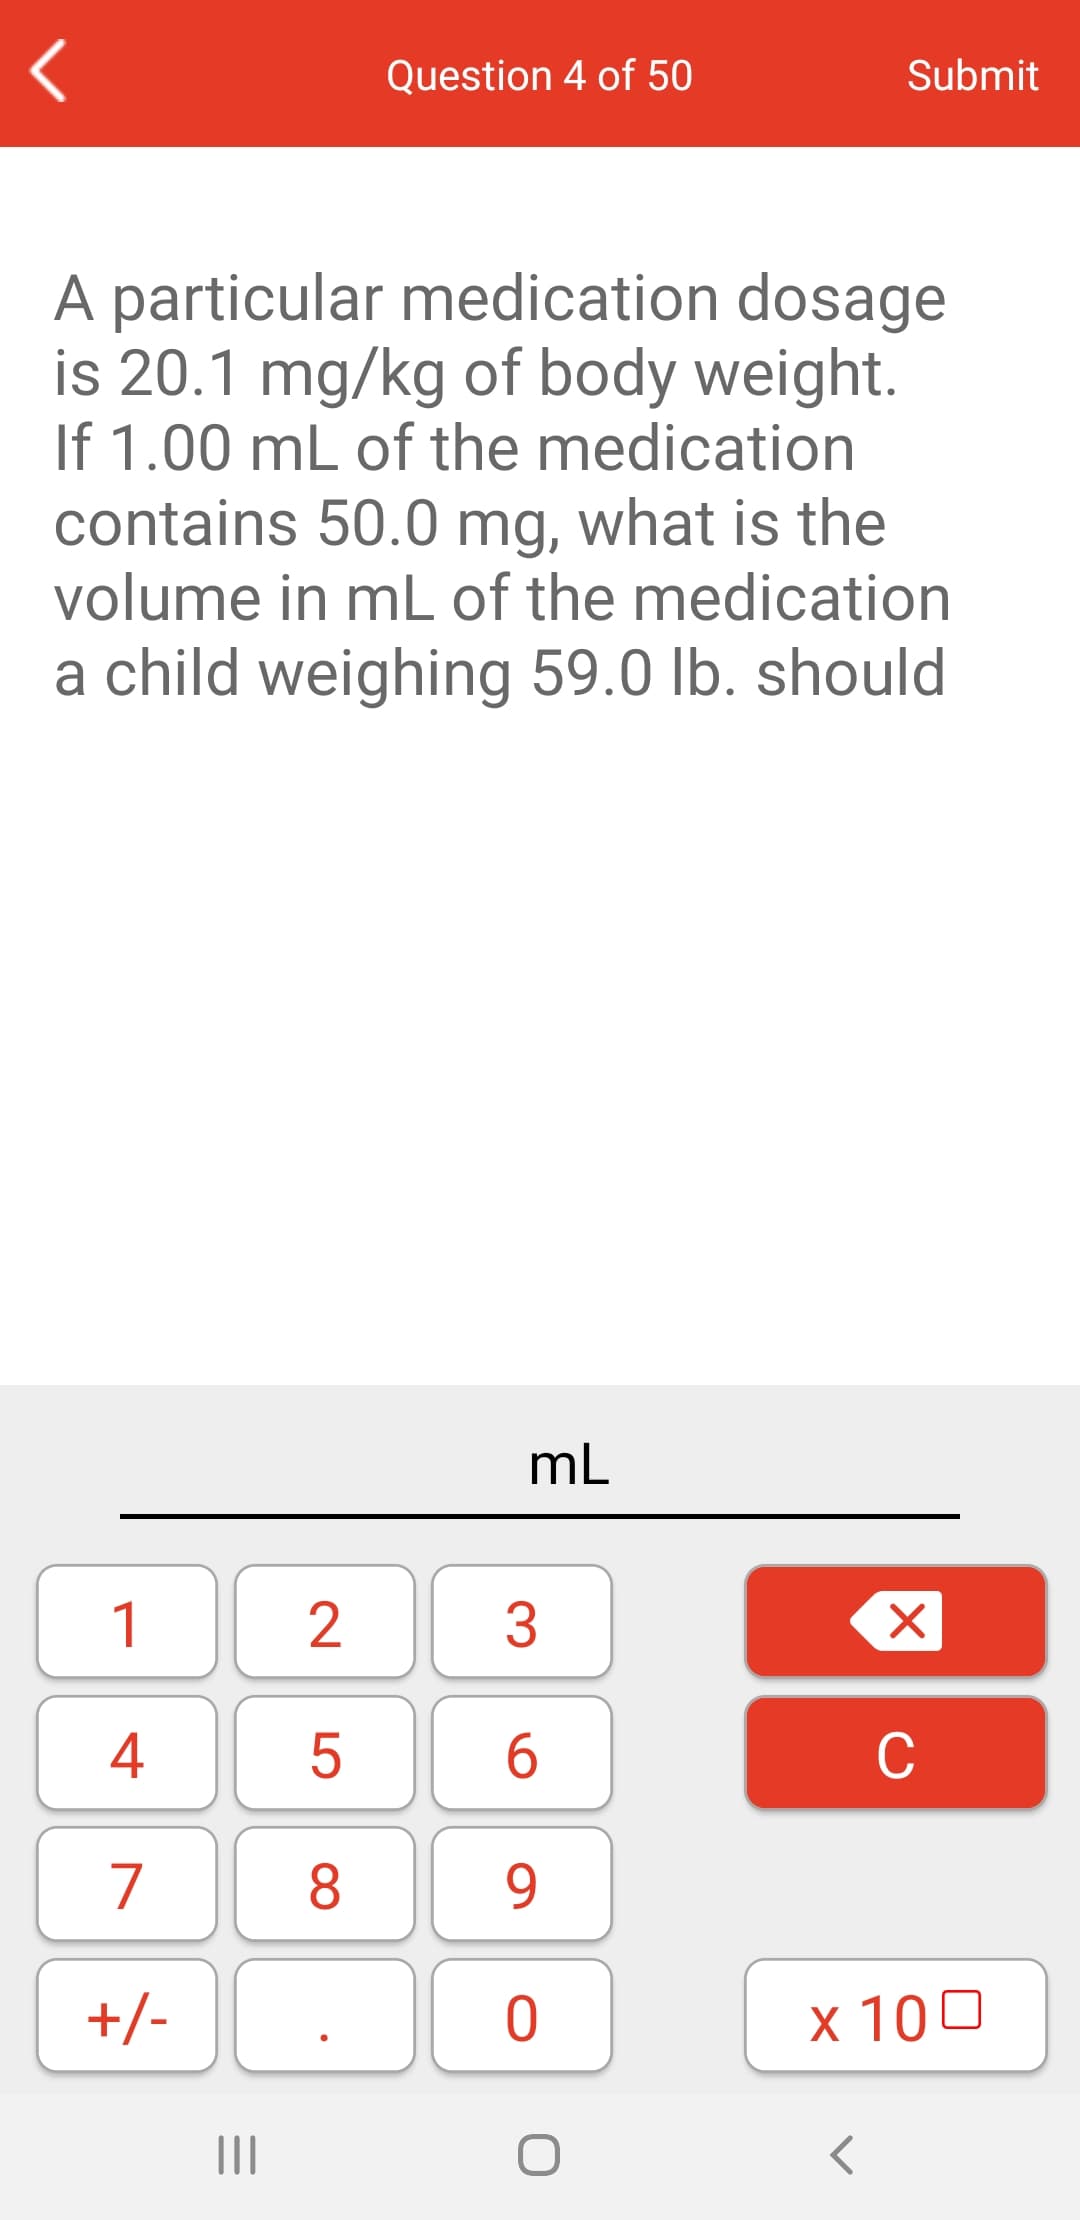 Question 4 of 50
Submit
A particular medication dosage
is 20.1 mg/kg of body weight.
If 1.00 mL of the medication
contains 50.0 mg, what is the
volume in mL of the medication
a child weighing 59.0 lb. should
mL
1
3
4
6.
C
7
8
9.
+/-
x 100
II
